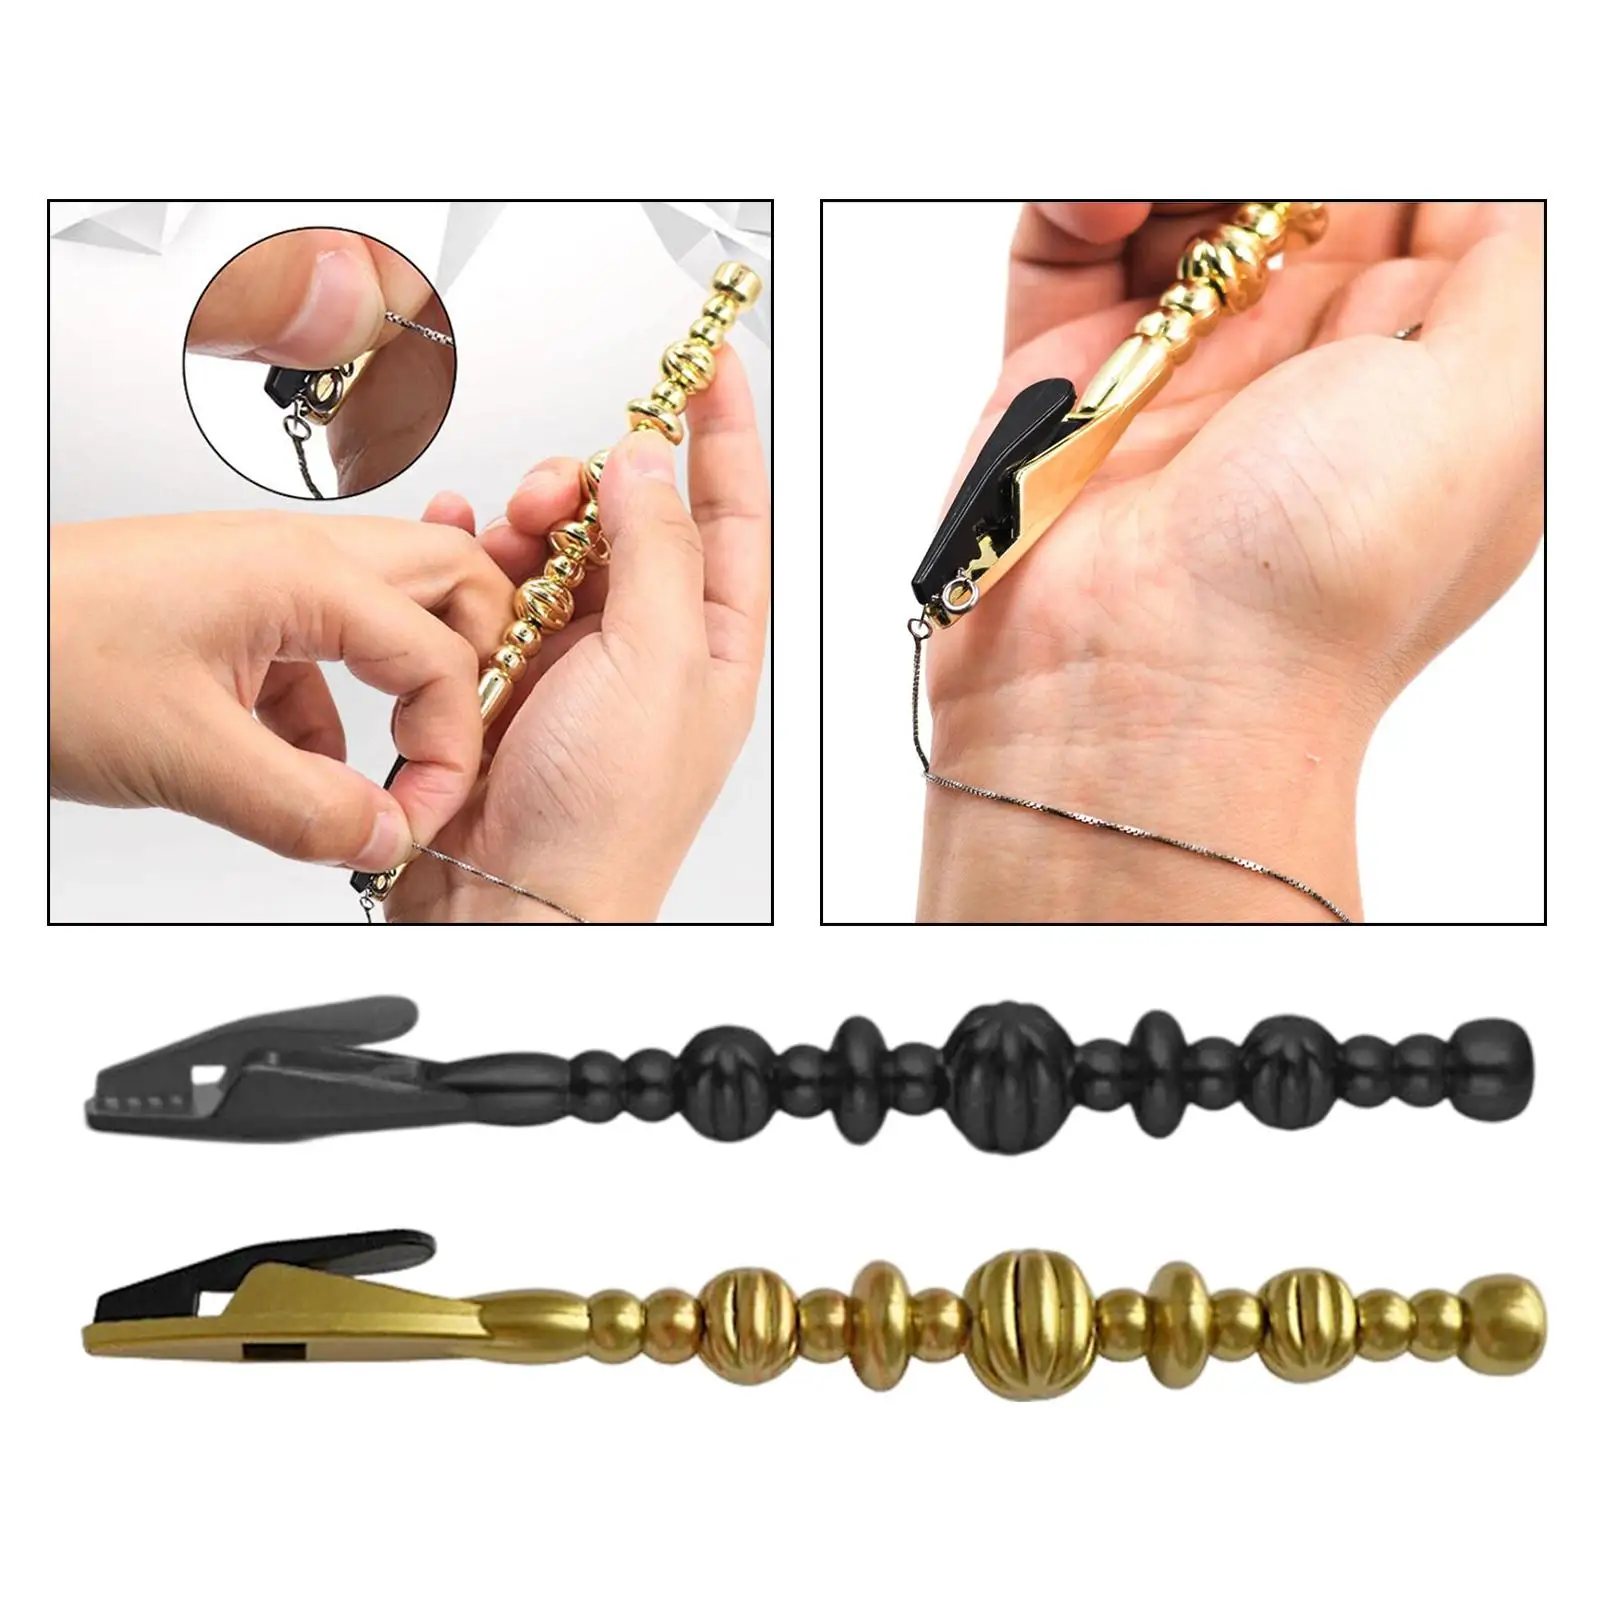 Bracelet Jewelry Helper Tool Fastening Aid Fastening and Hooking Equipment Clasp Tool for Bracelets Watch Necklace Dressing